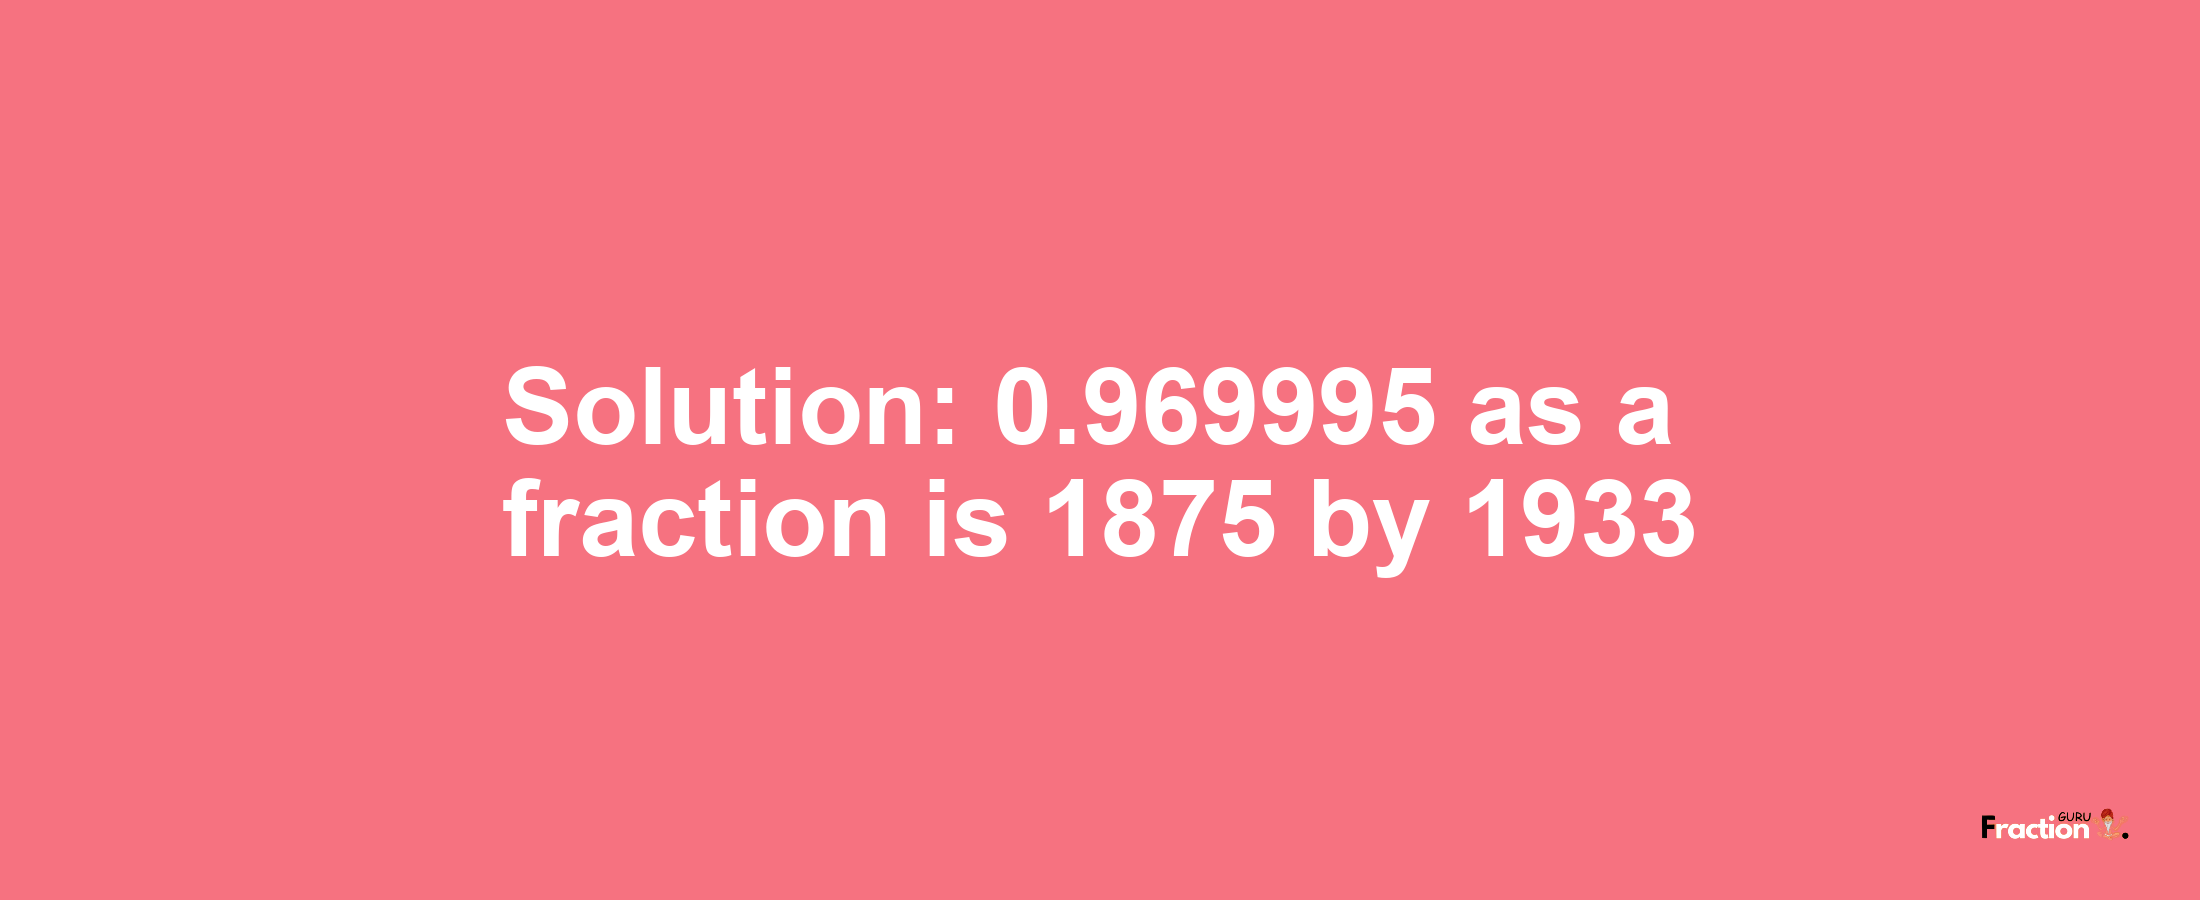 Solution:0.969995 as a fraction is 1875/1933